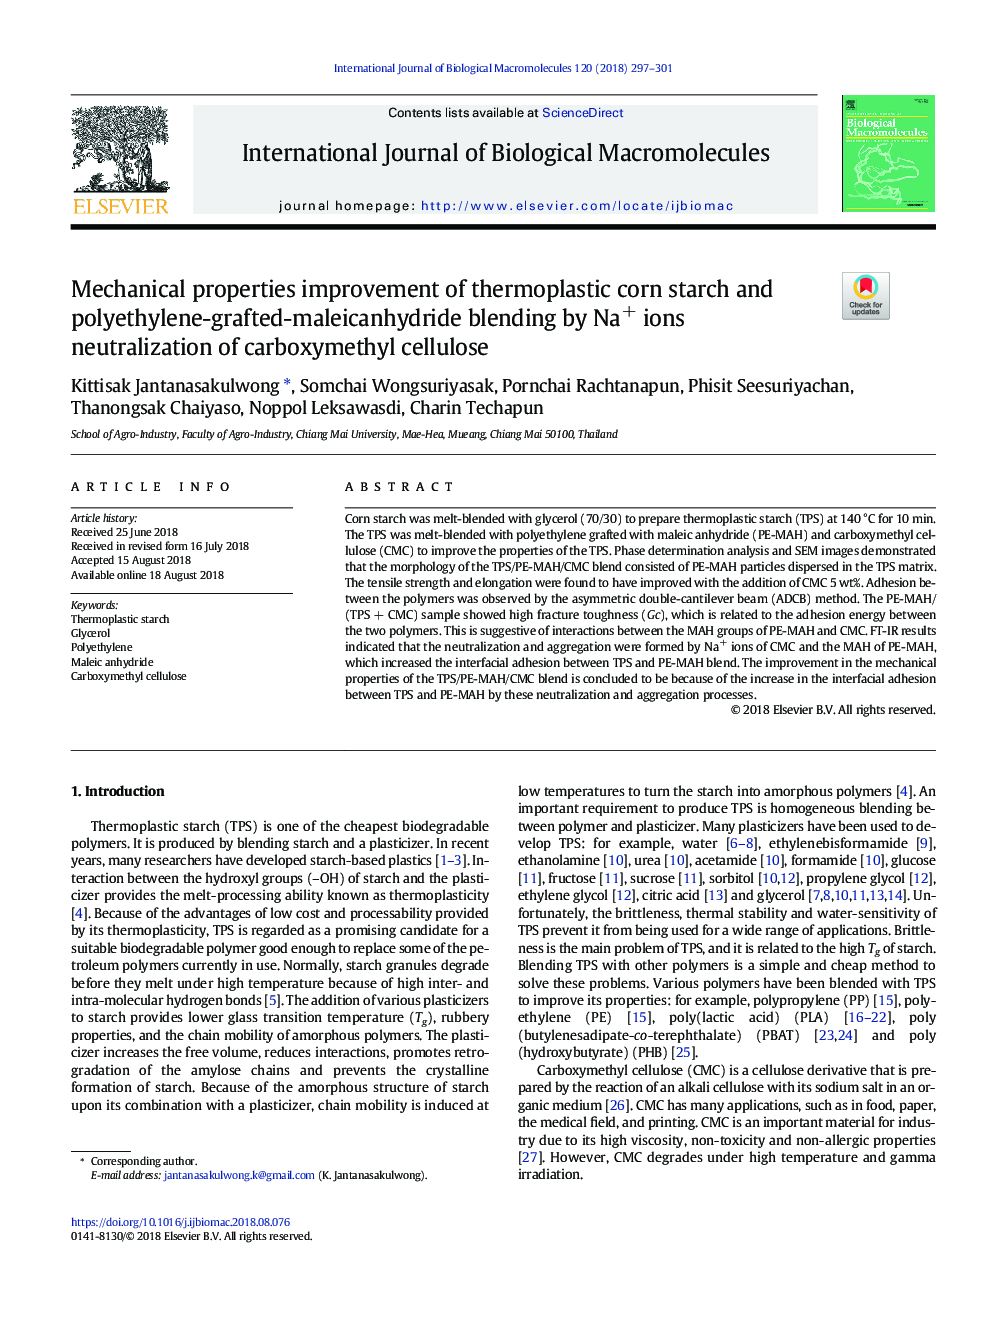 Mechanical properties improvement of thermoplastic corn starch and polyethylene-grafted-maleicanhydride blending by Na+ ions neutralization of carboxymethyl cellulose